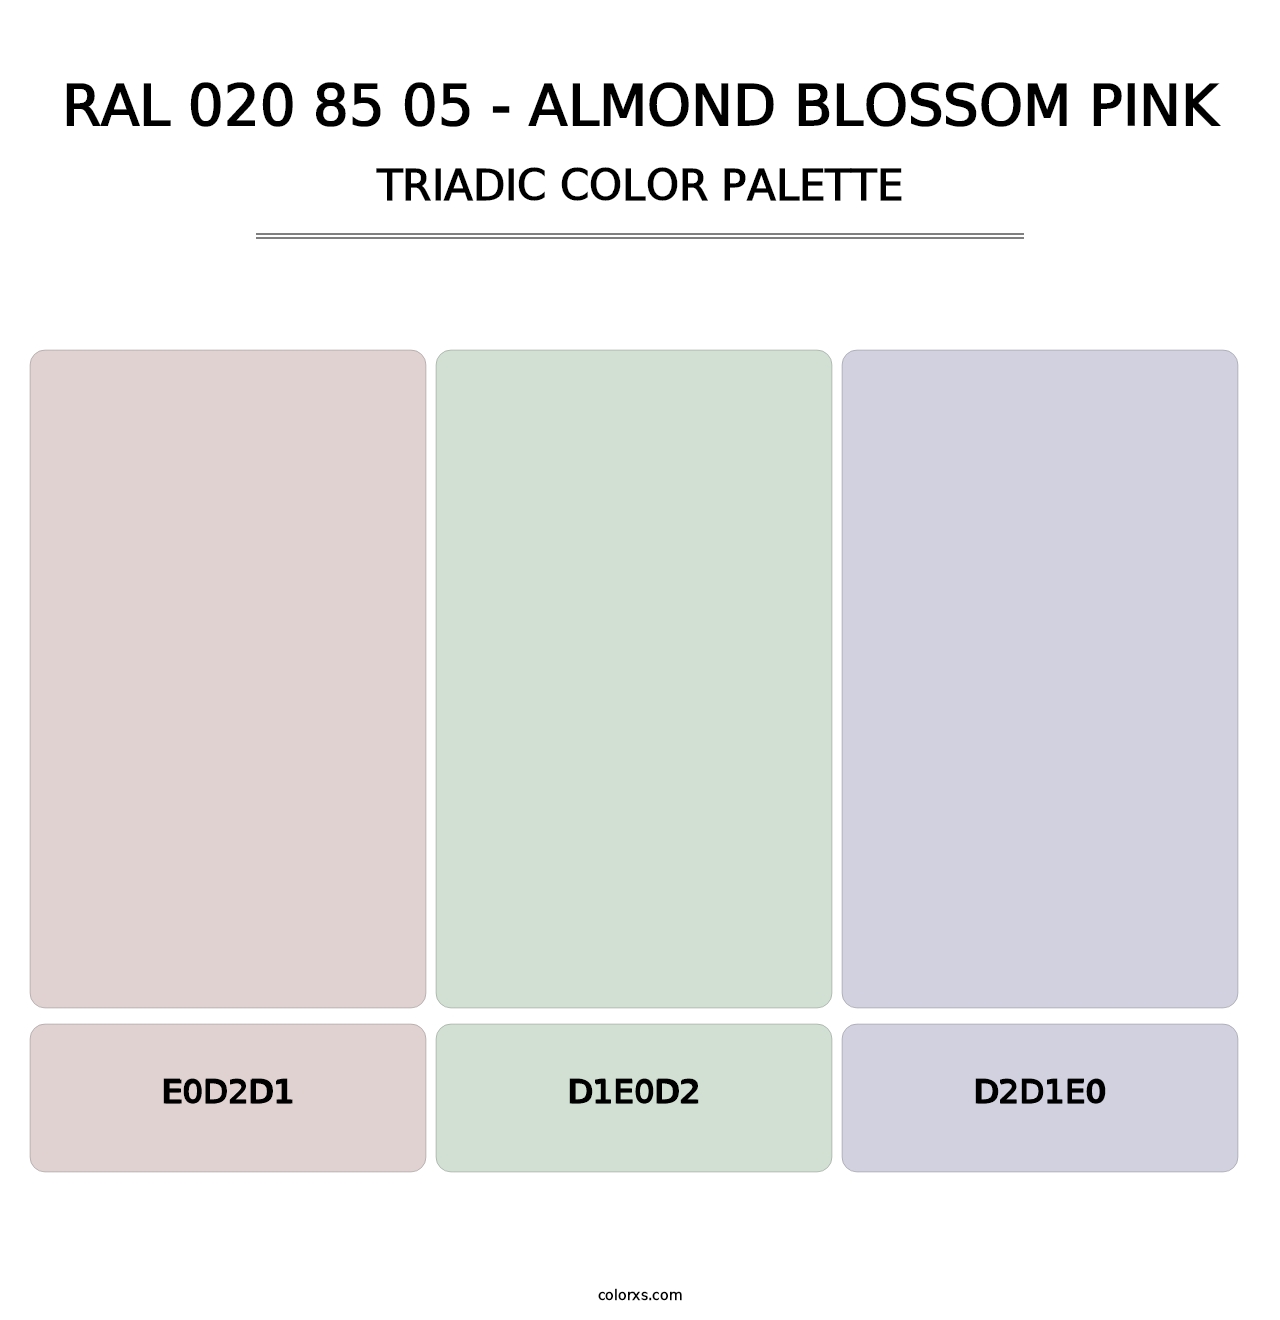 RAL 020 85 05 - Almond Blossom Pink - Triadic Color Palette